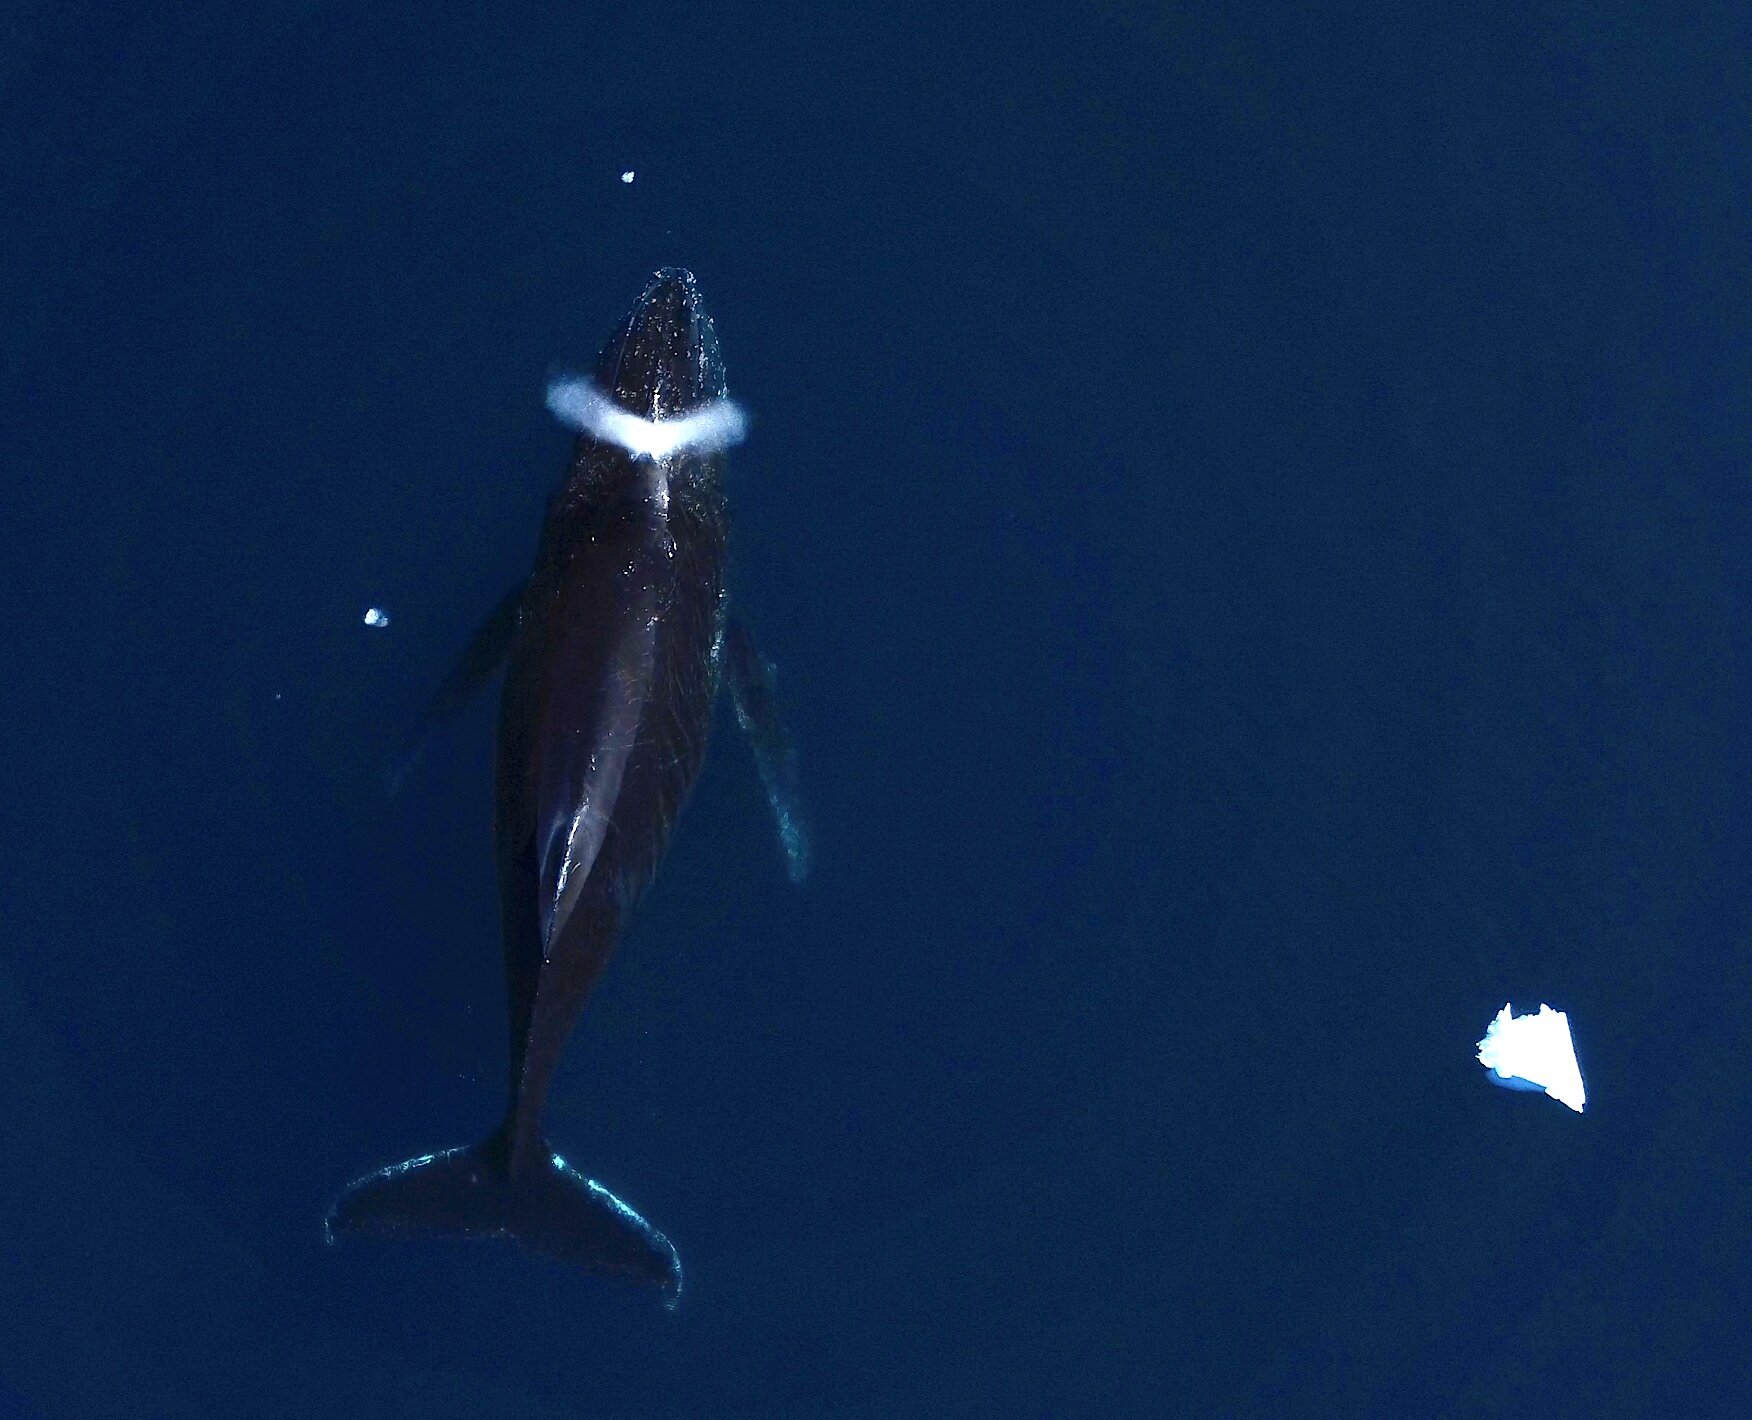 Don’t count on whales as ‘climate savers,’ says study